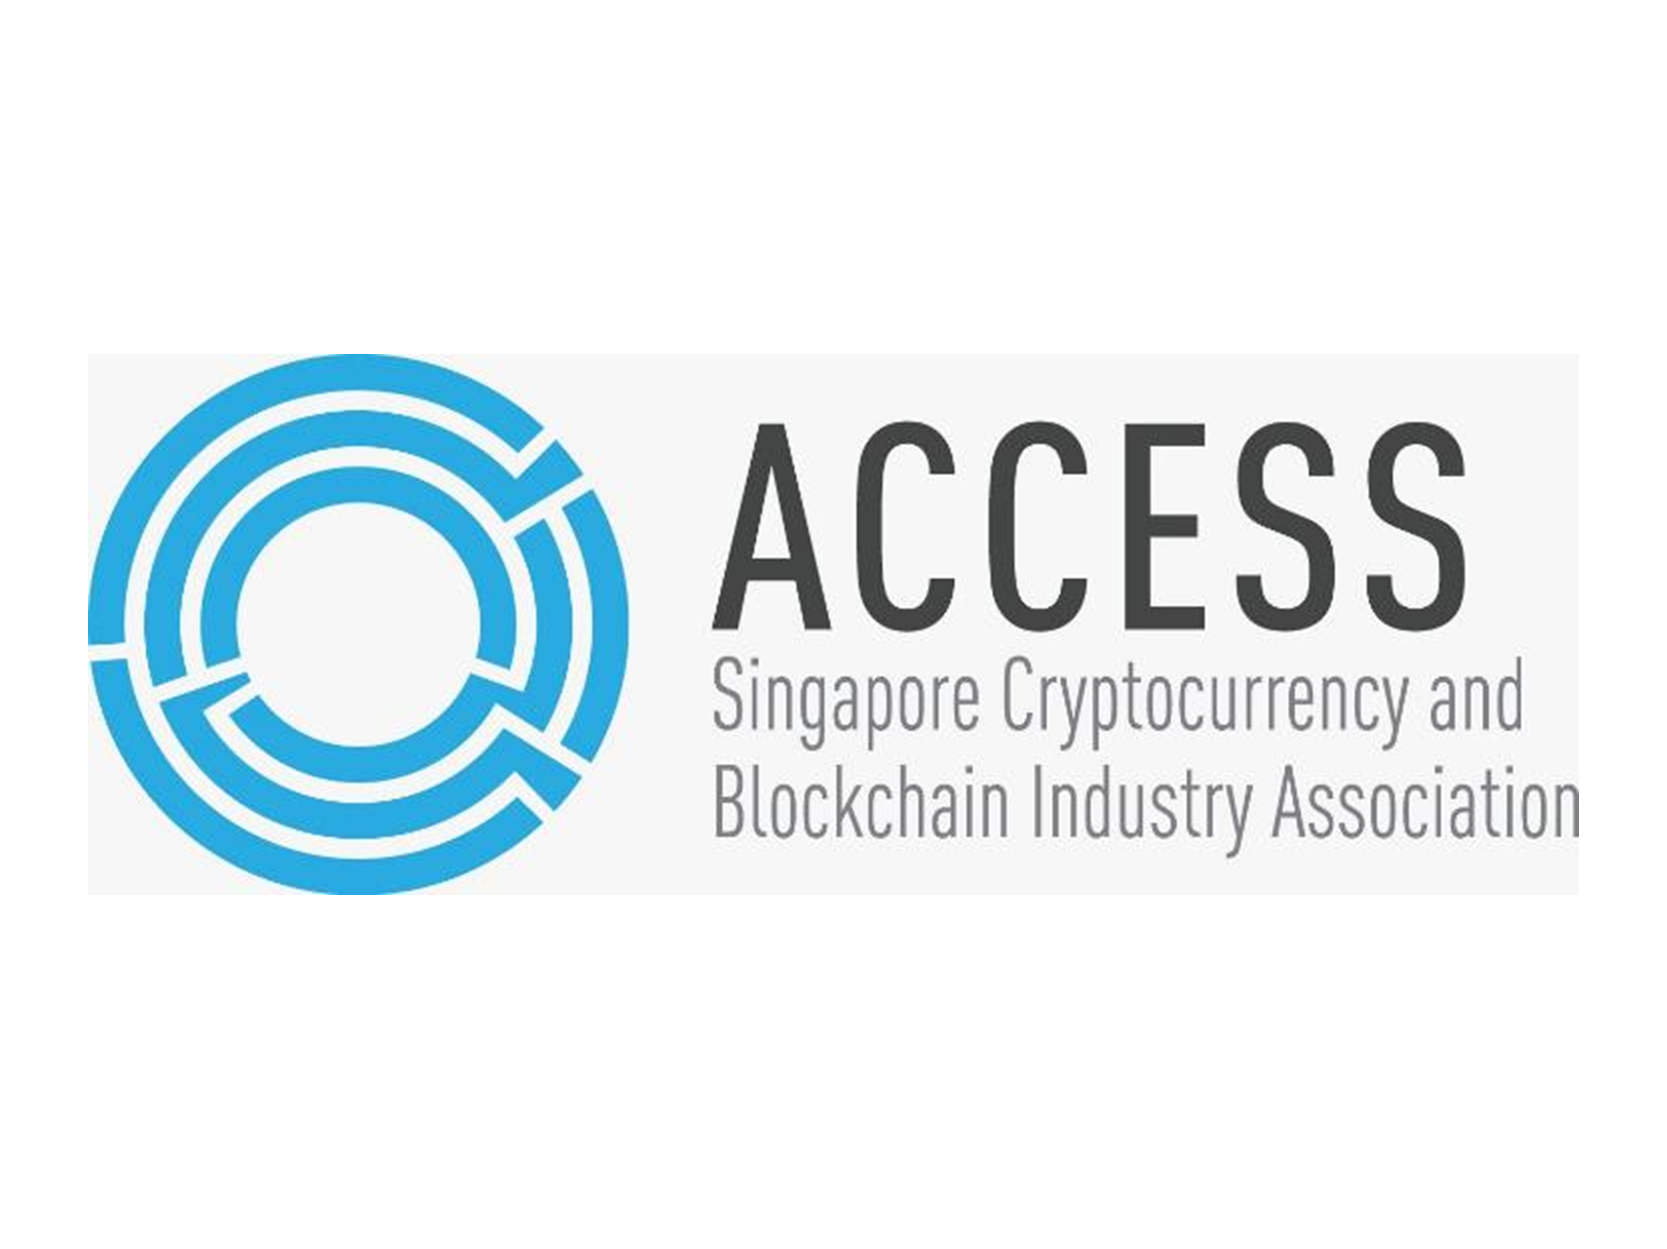 singapore cryptocurrency and blockchain industry association